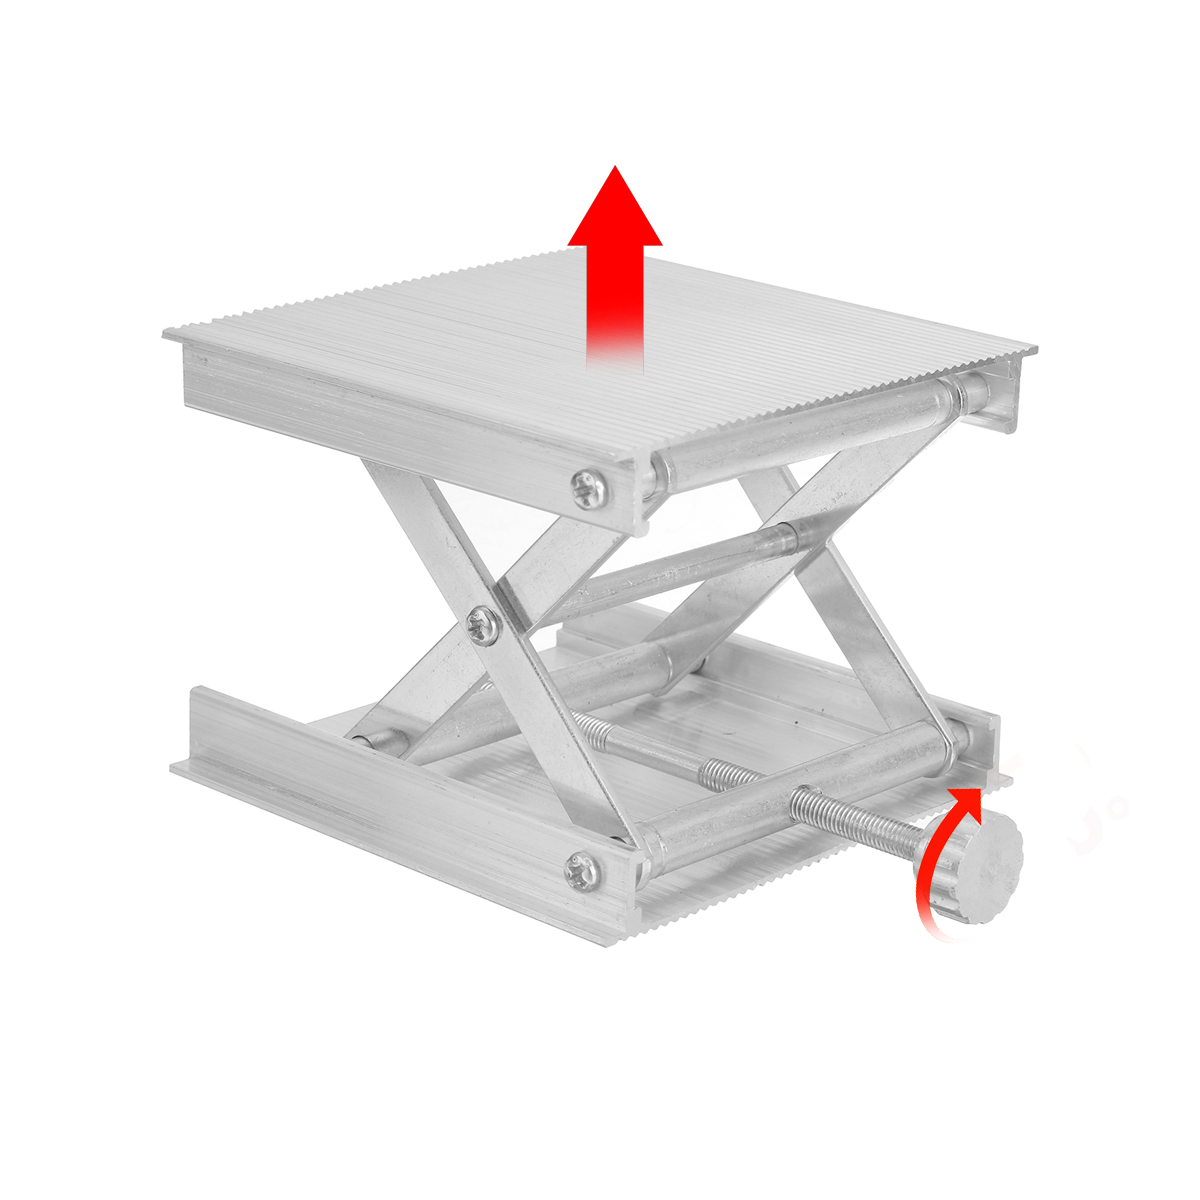 25-65-99cm-Aluminum-Router-Table-Woodworking-Engraving-Lab-Lifting-Stand-Rack-Platform-Benches-1861024-9